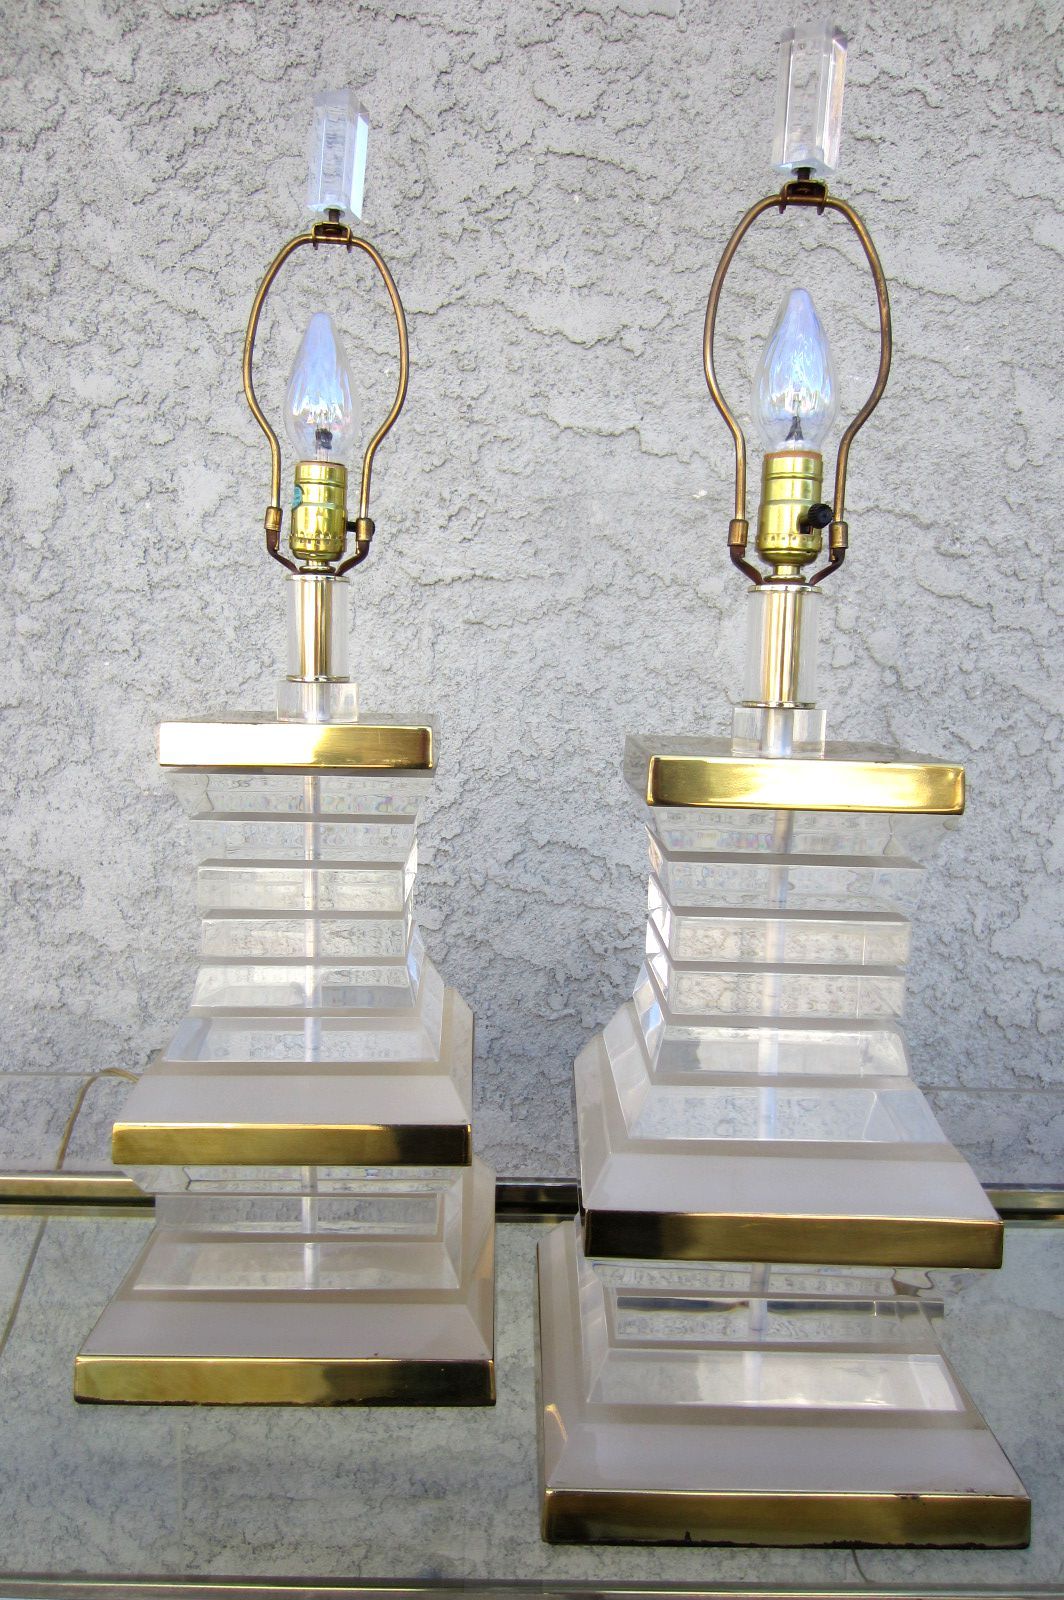 American Pair of Stacked Lucite and Brass Lamps, circa 1970s Hollywood Regency